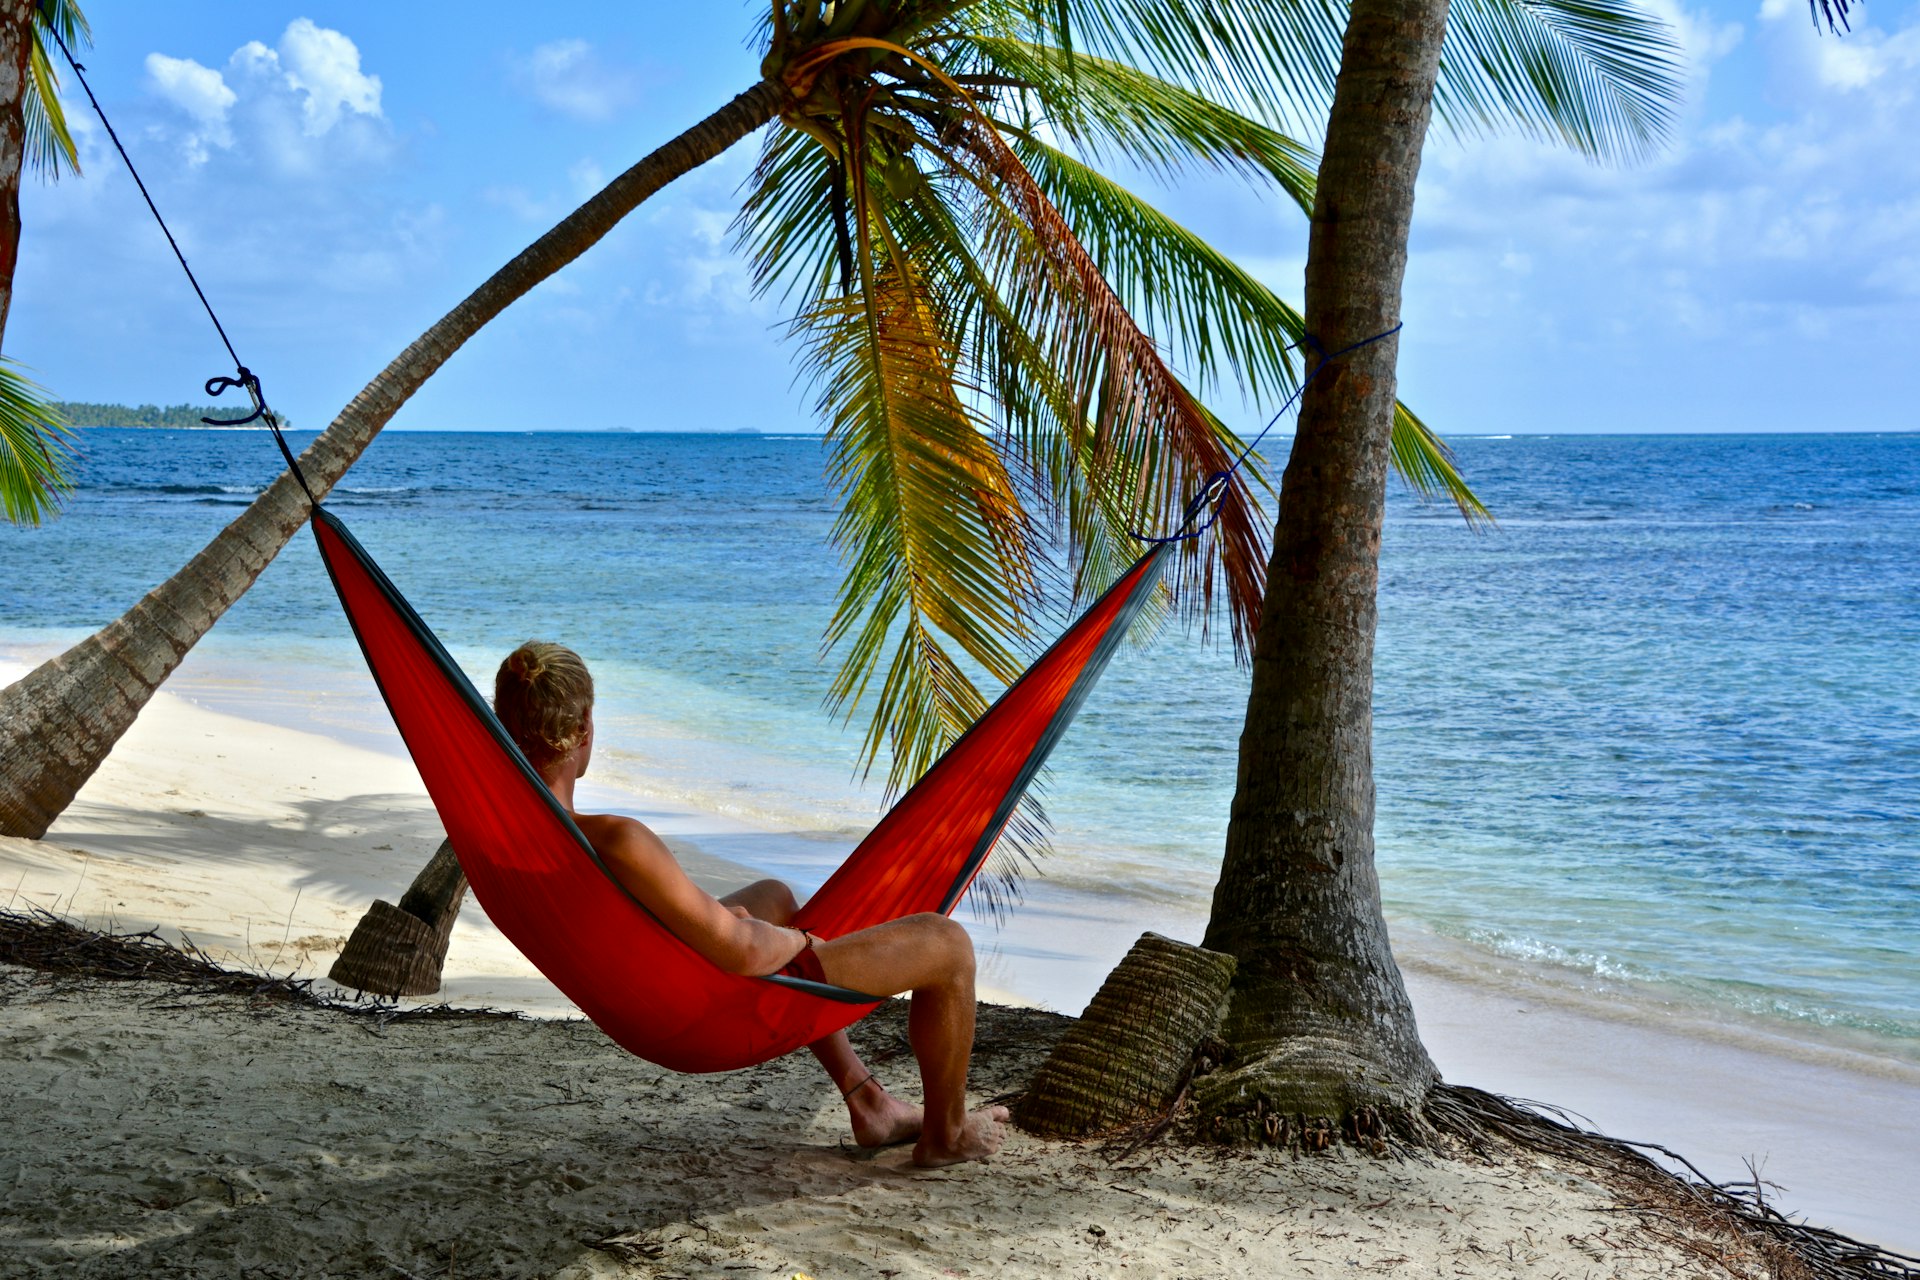 A man in a bathing suit looks out at the ocean while relaxing in a hammock strung between palm trees on Relaxing in a hammock on Islas San Blas in Panama